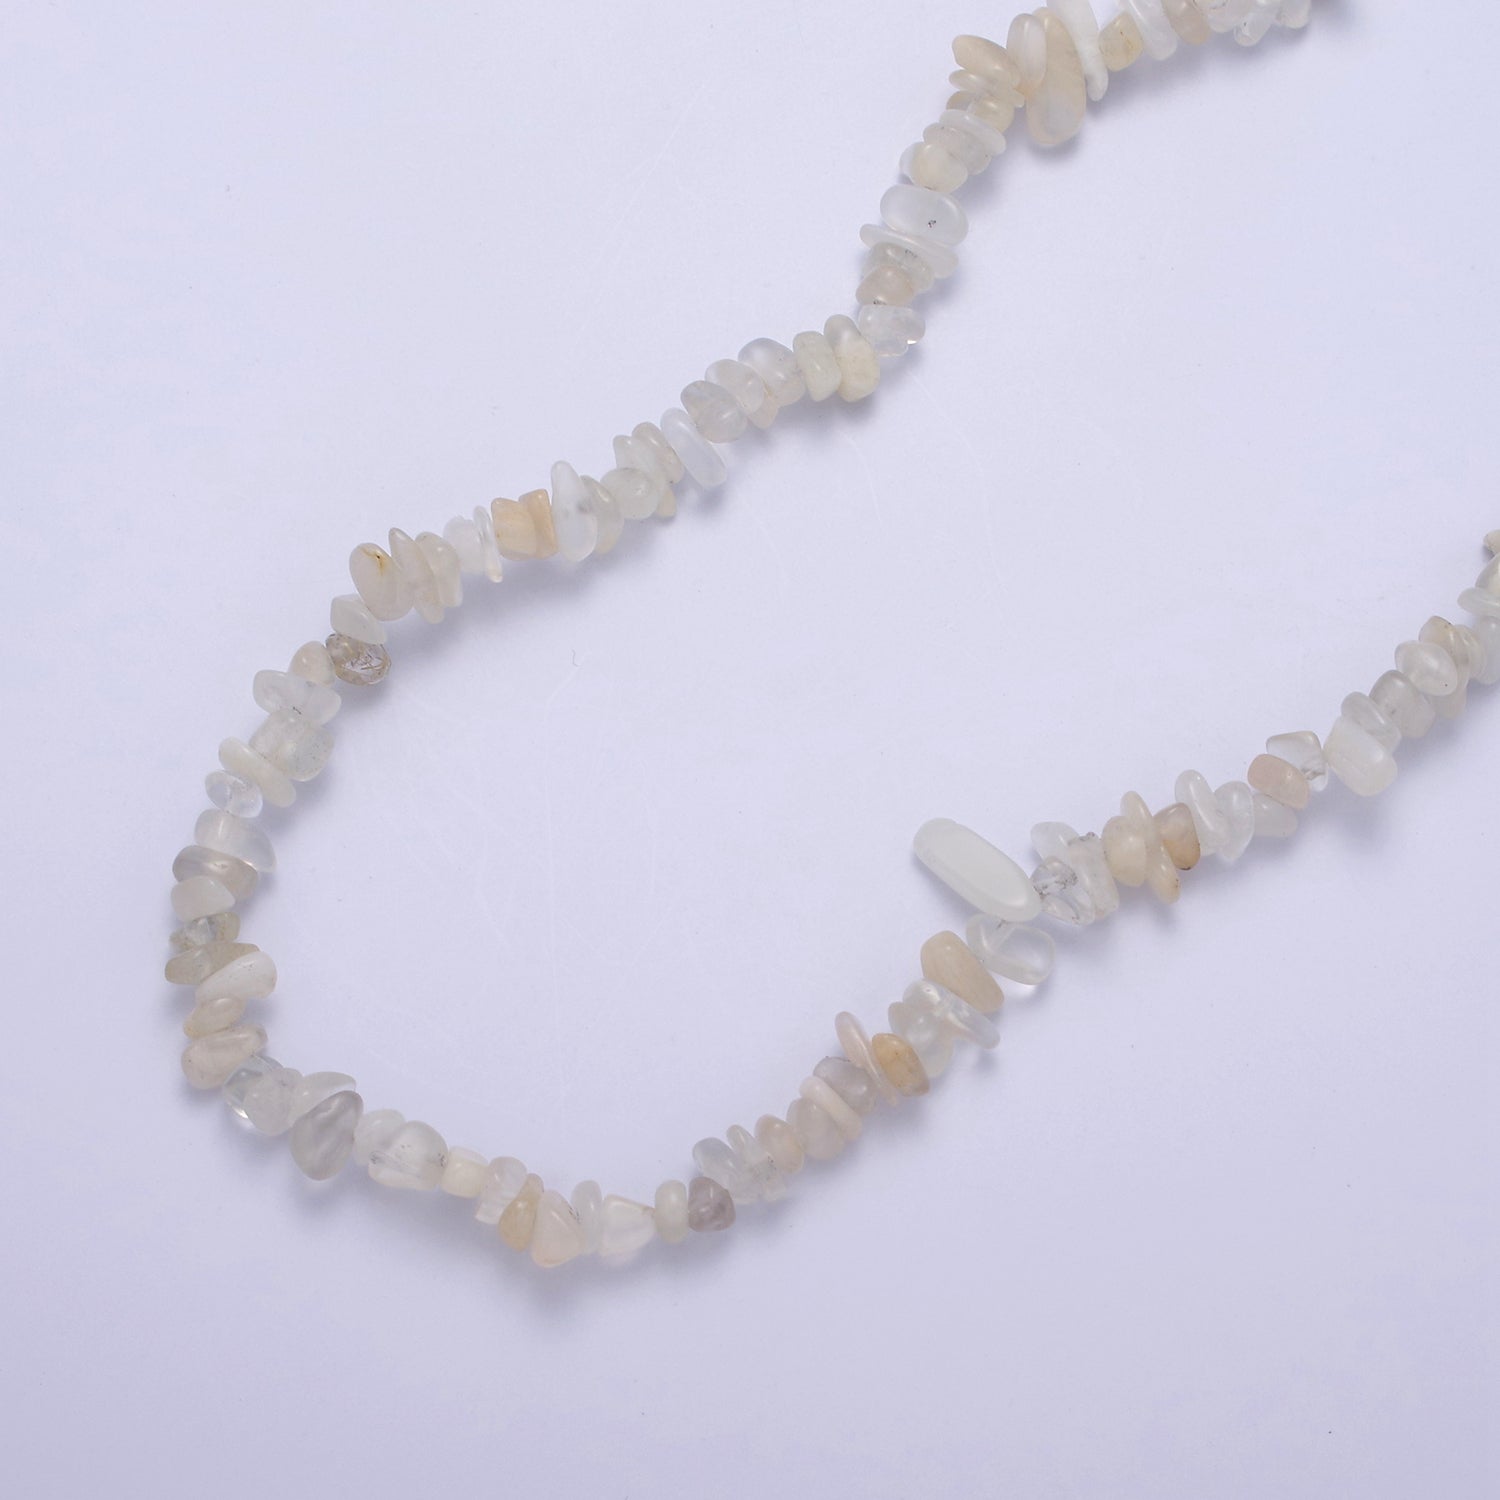 18 Inch Natural Genuine White Moonstone Gemstones Bead Necklace with 2" Extender WA-633 - DLUXCA